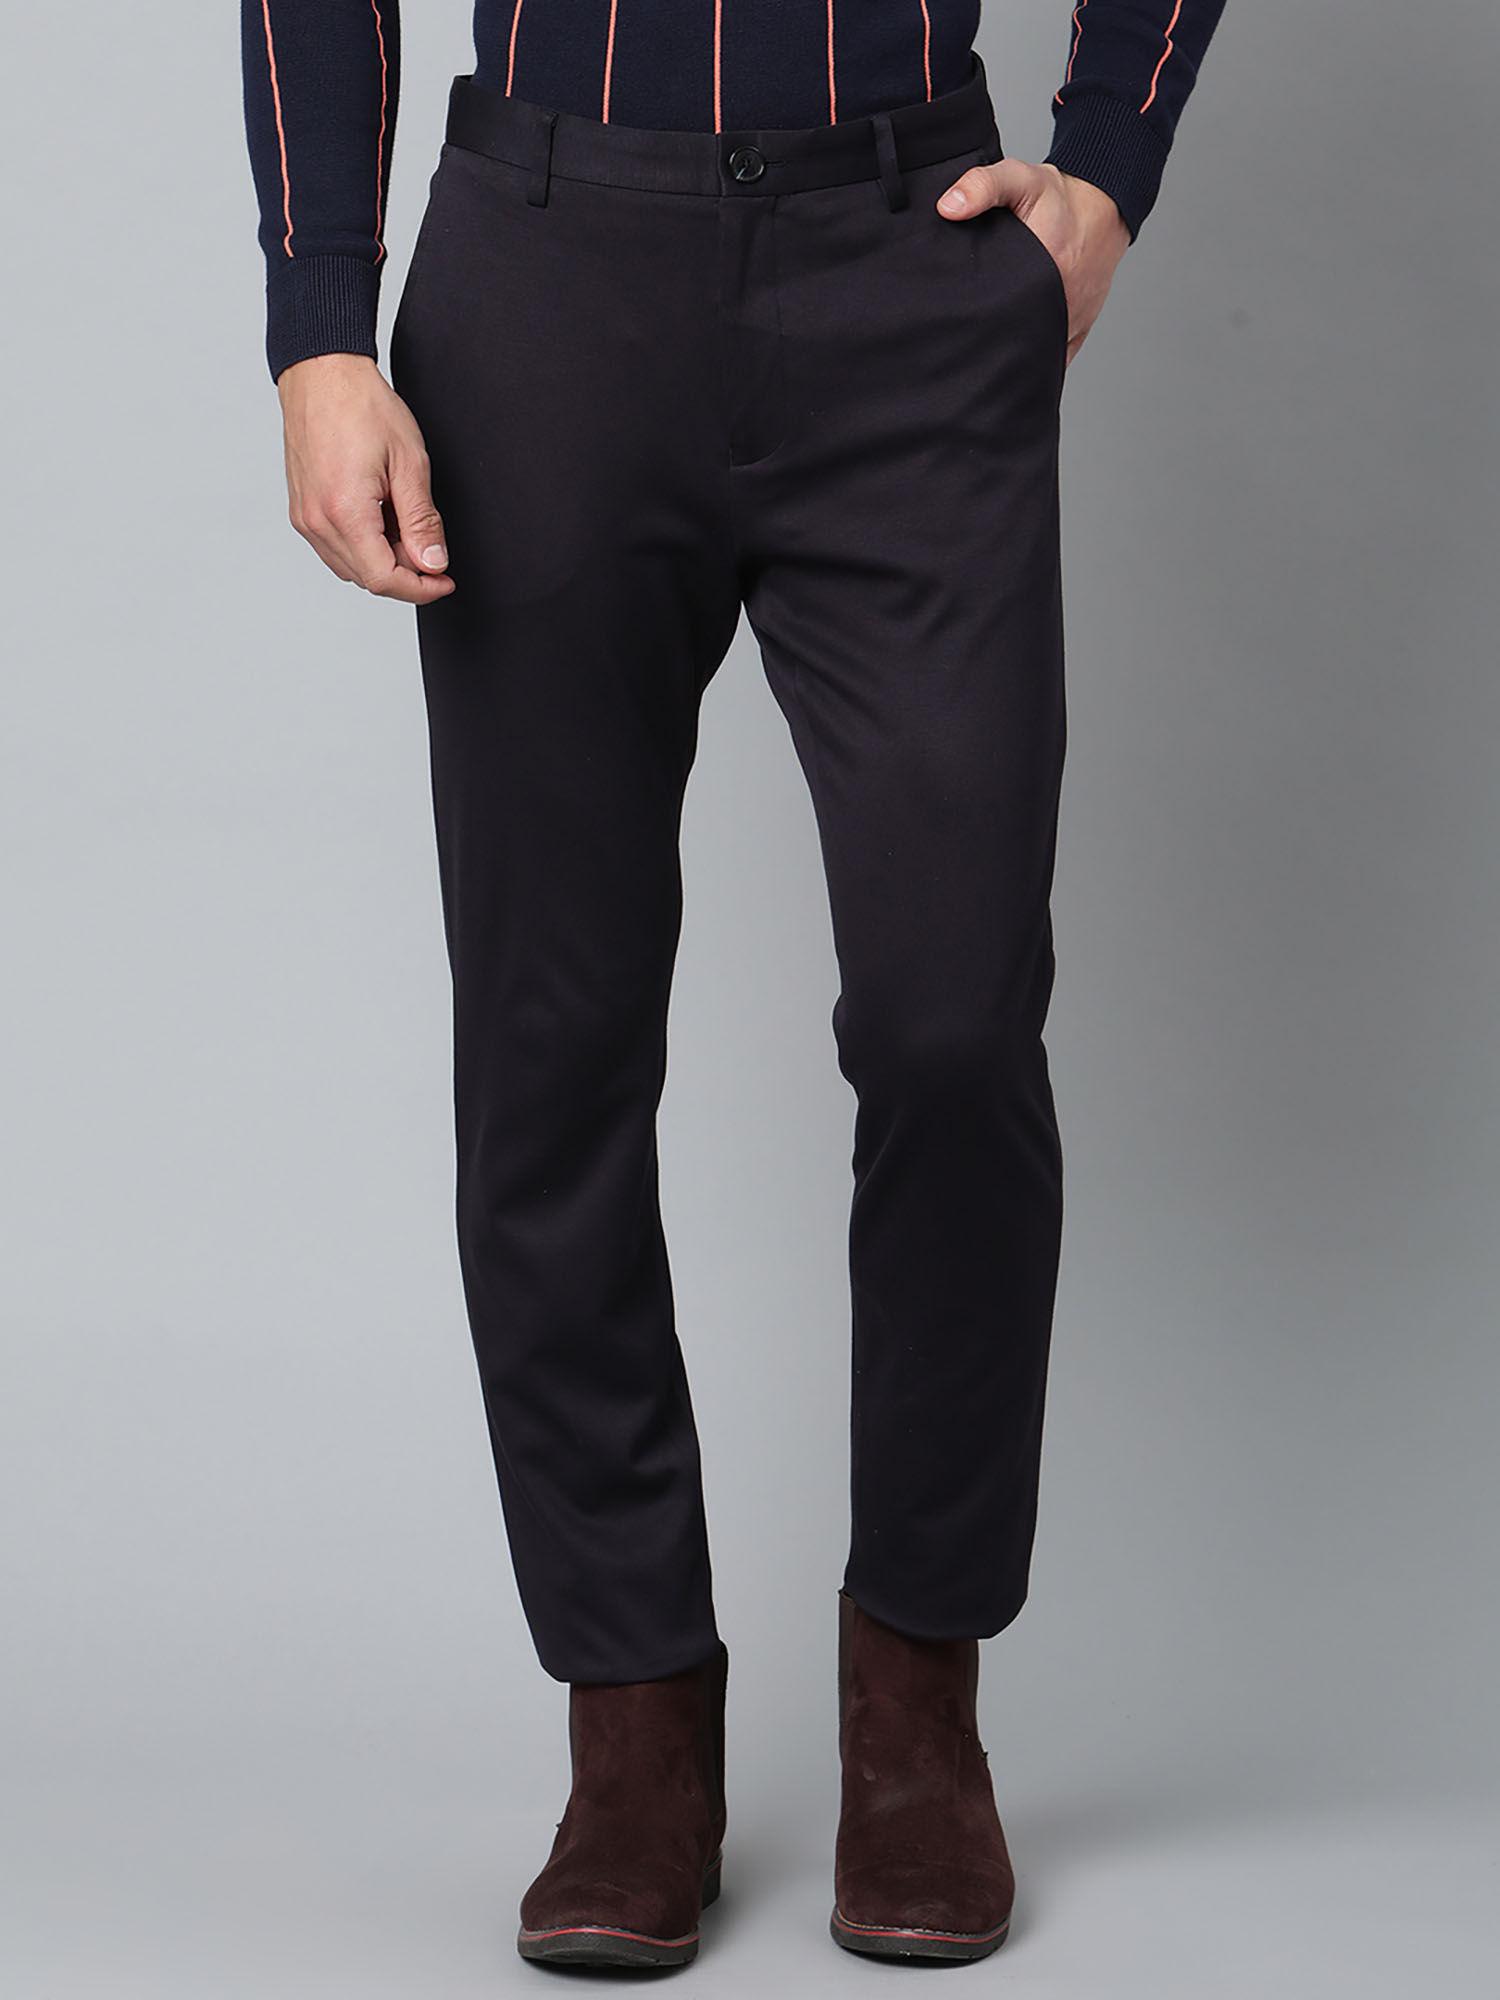 navy solid slim fit trouser